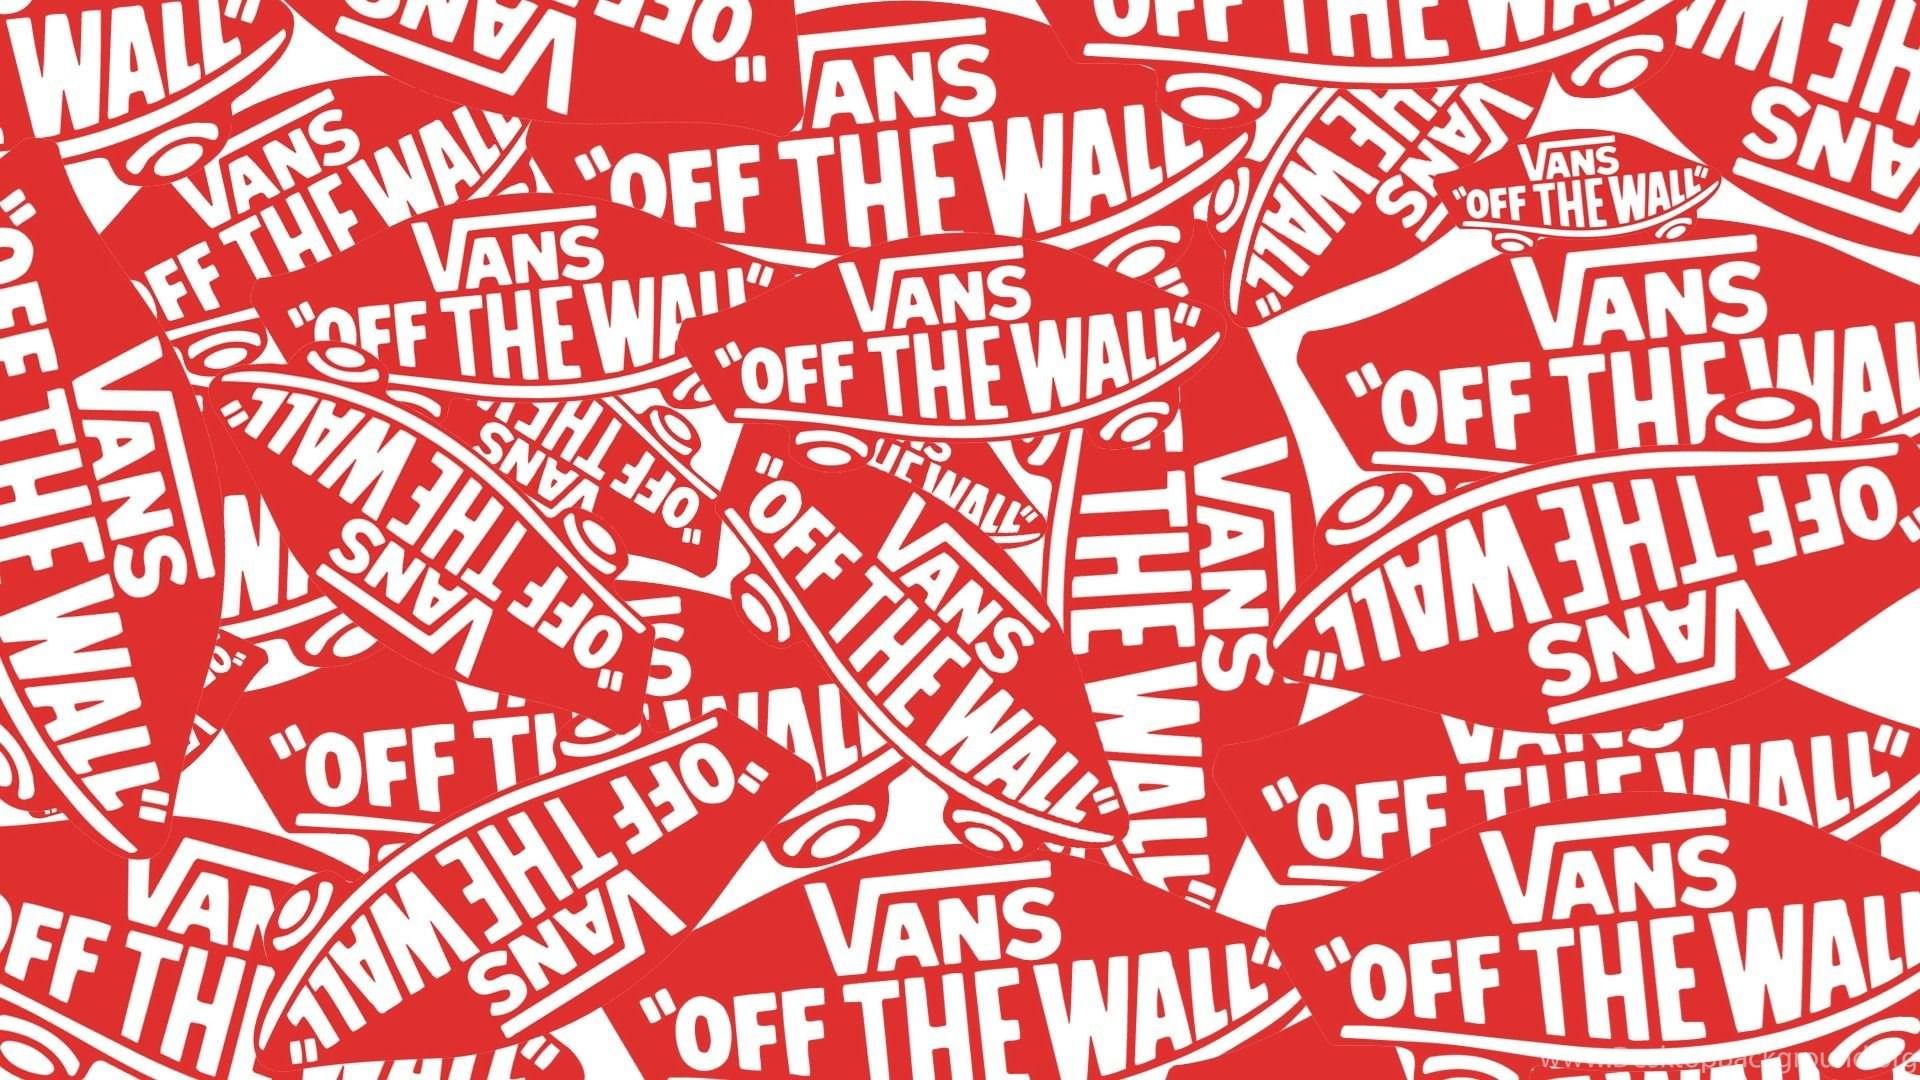 Vans Off the Wall Wallpapers - Top Free 